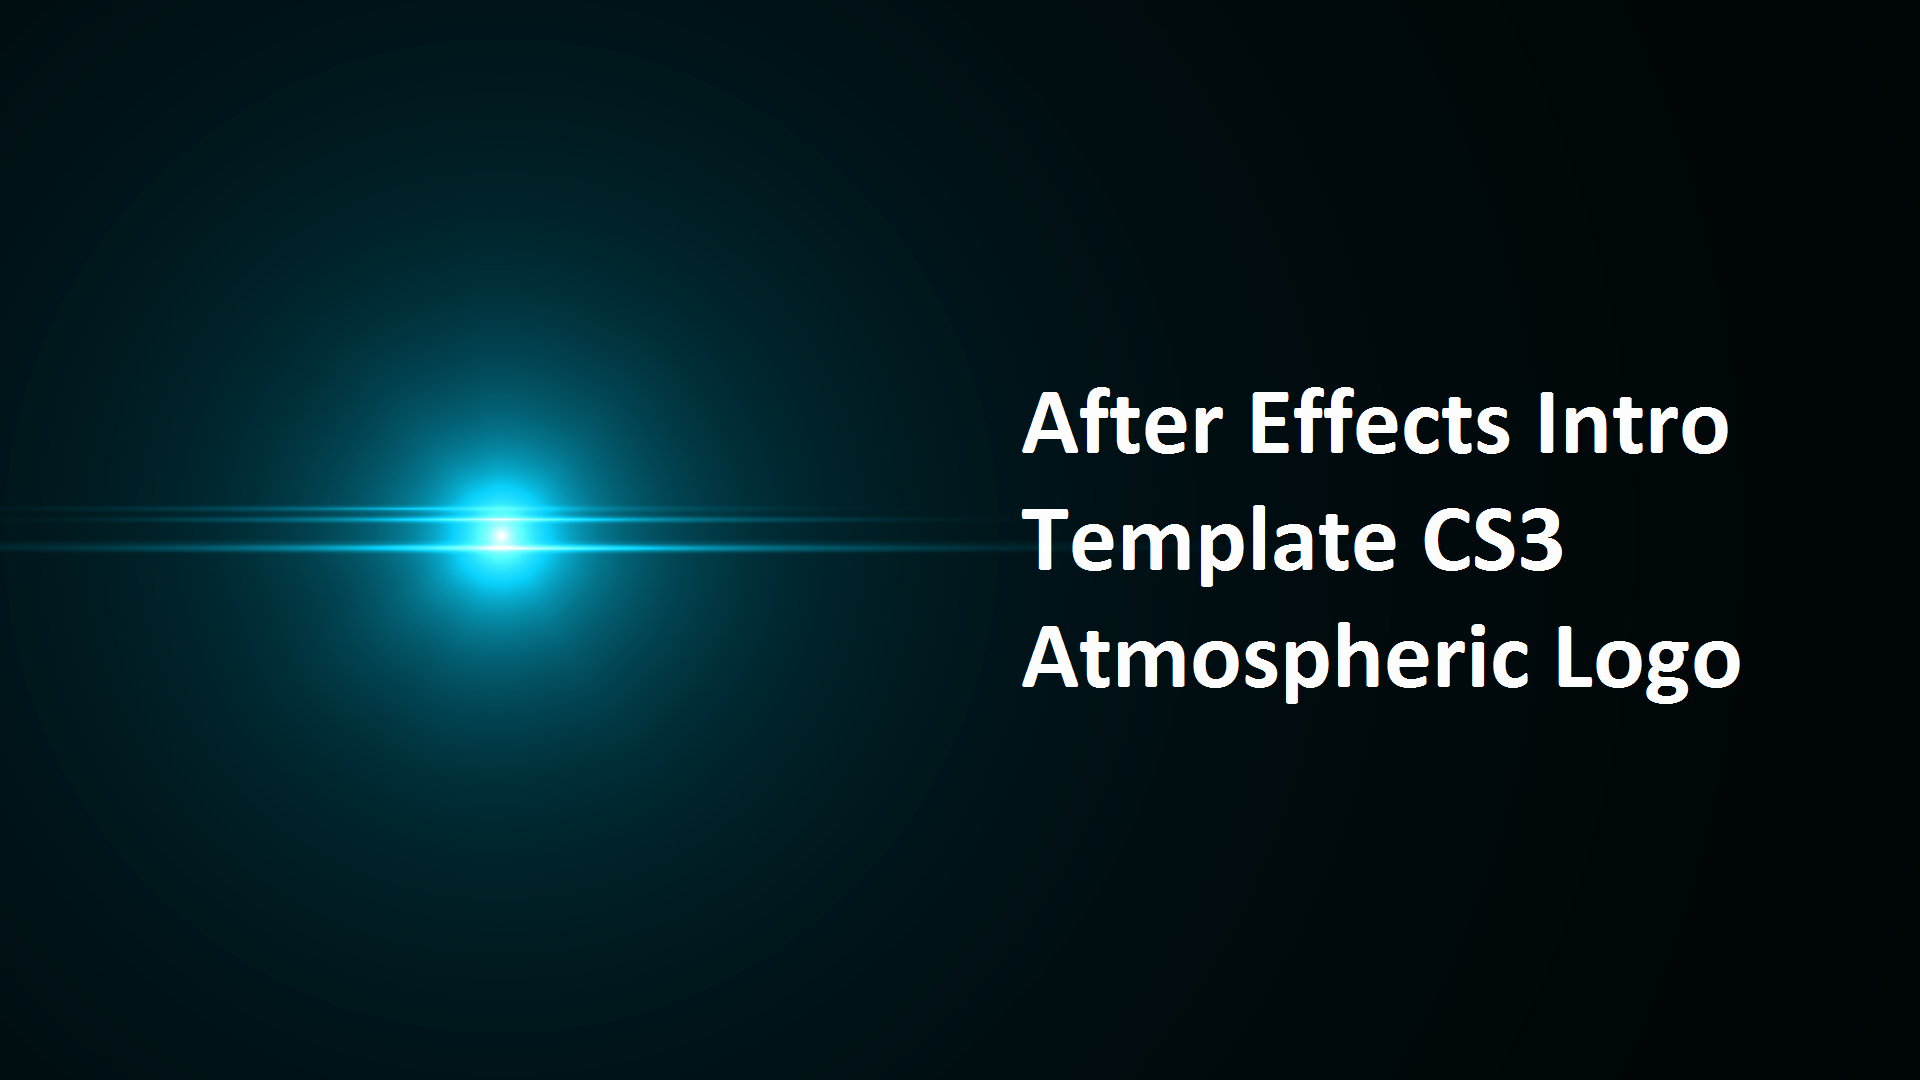 After Effects Intro Templates